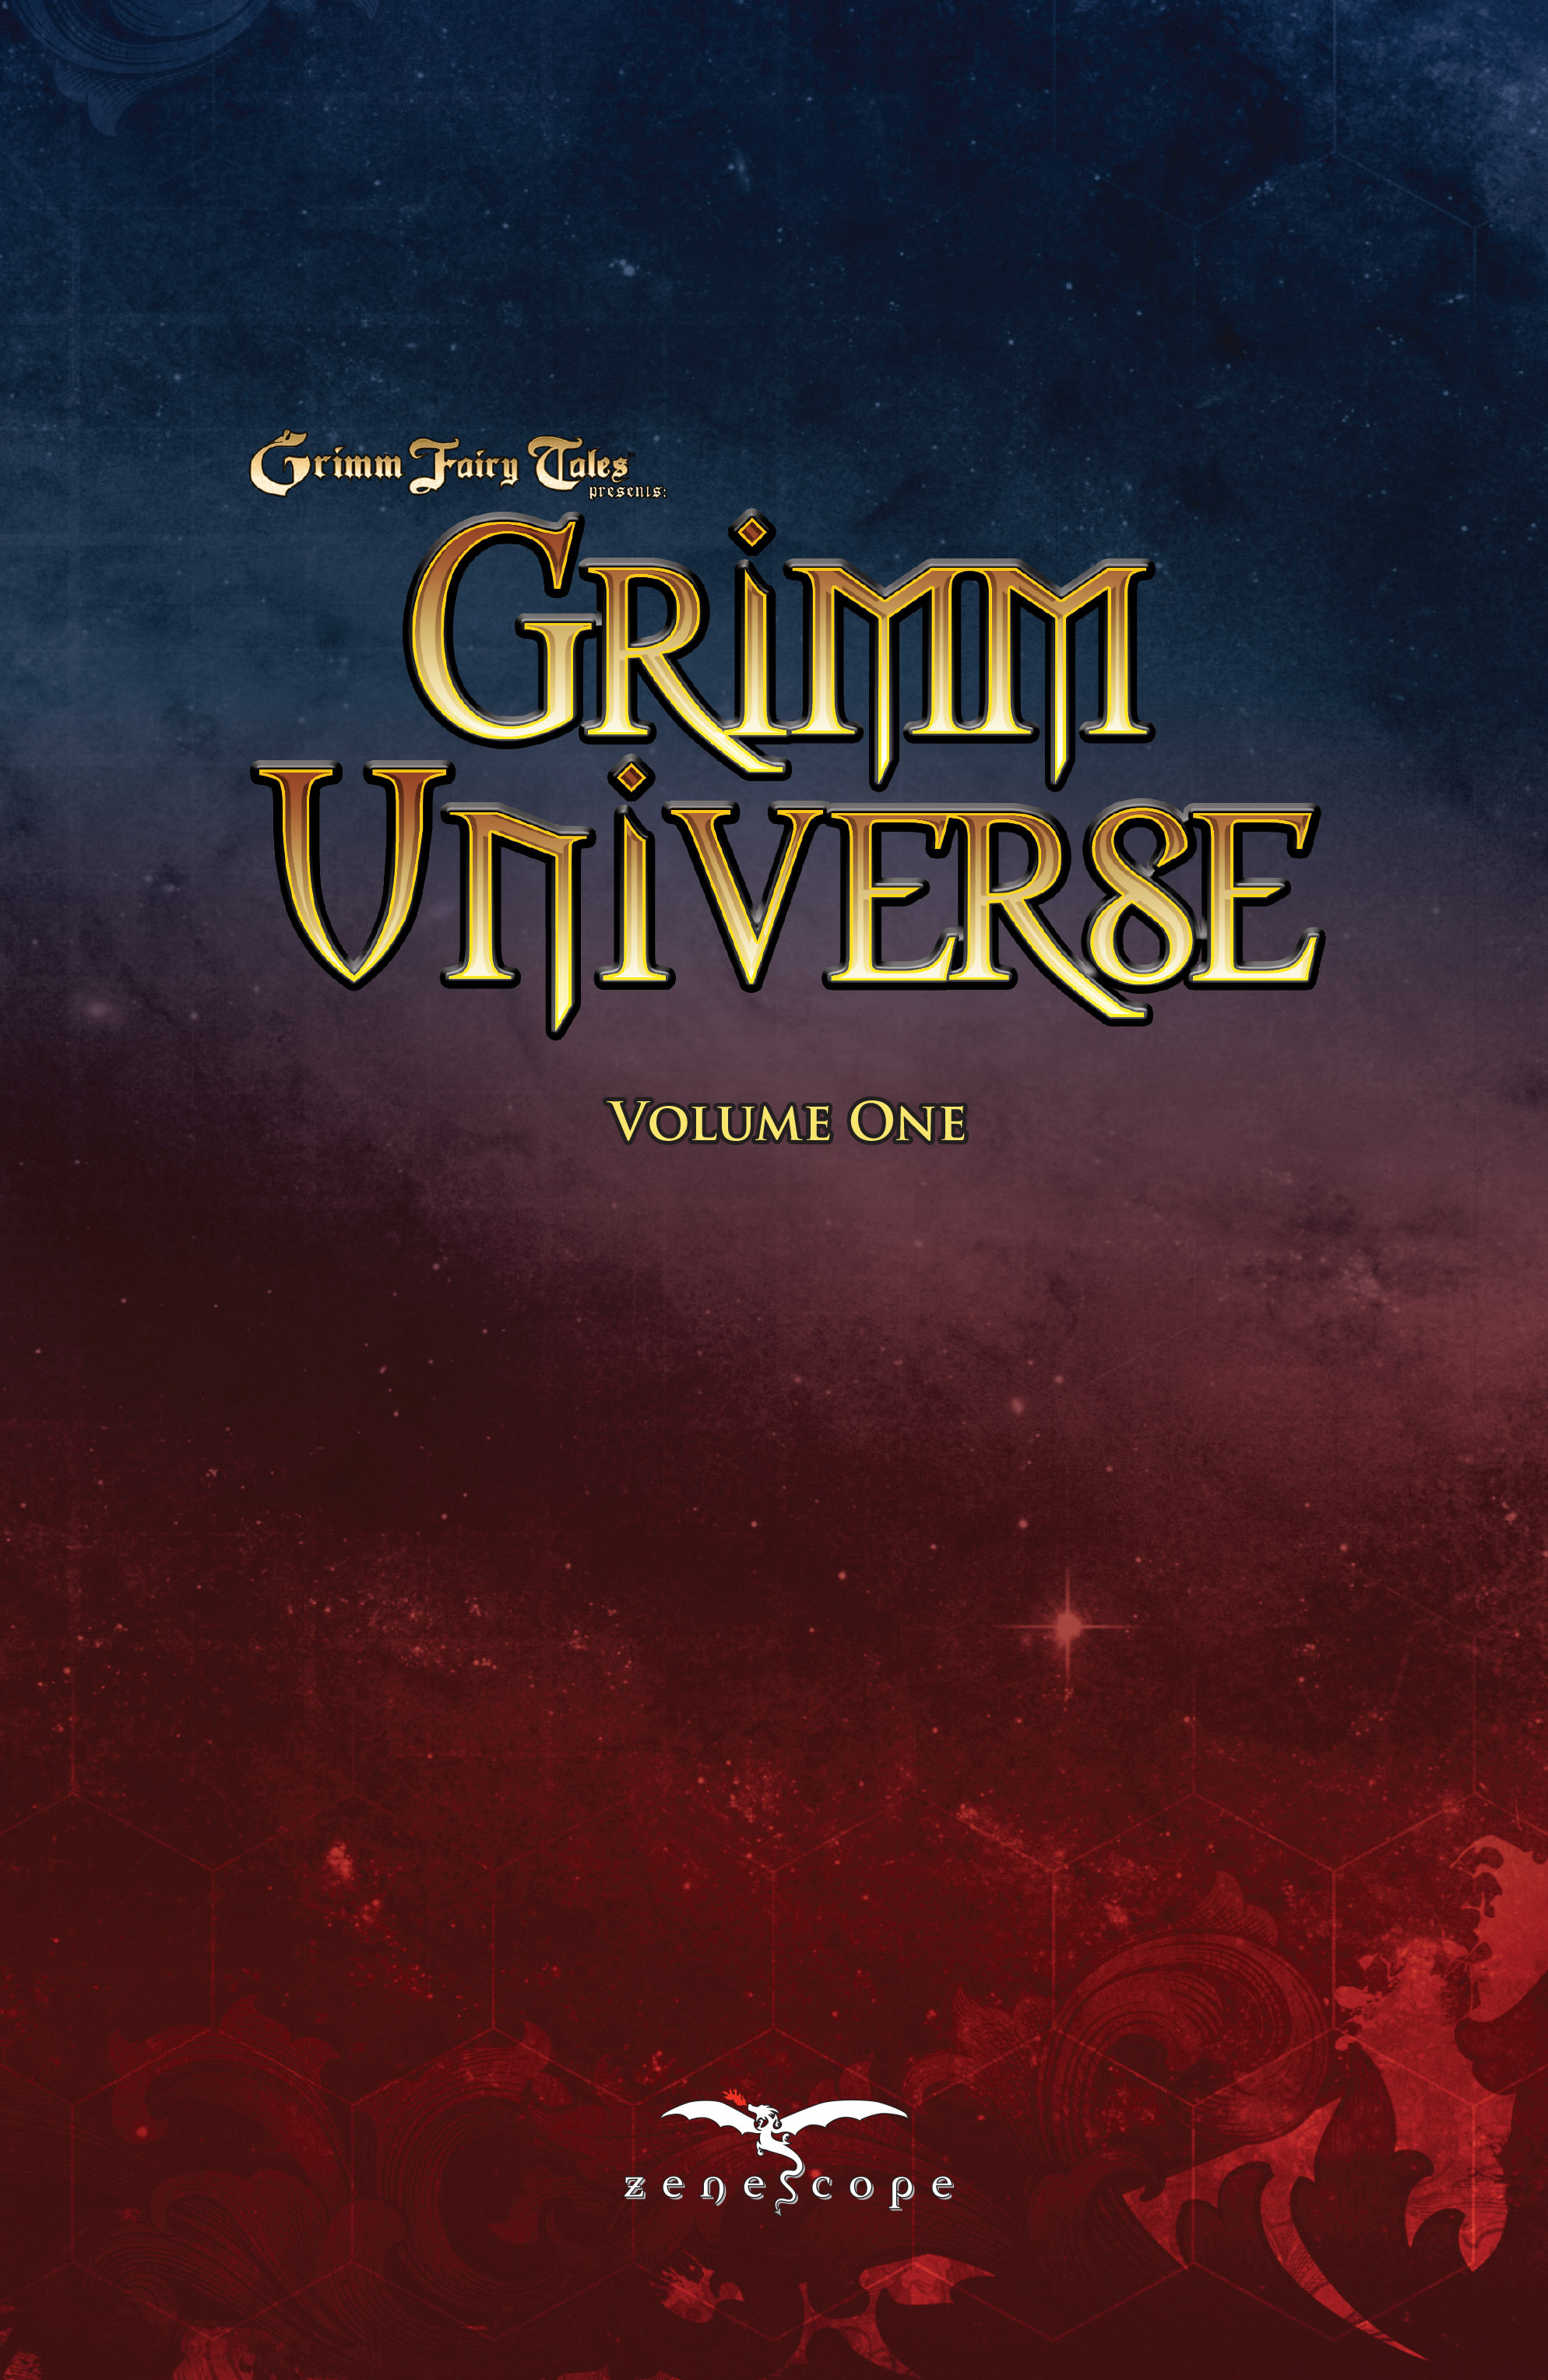 Read online Grimm Fairy Tales presents Grimm Universe comic -  Issue # TPB - 2